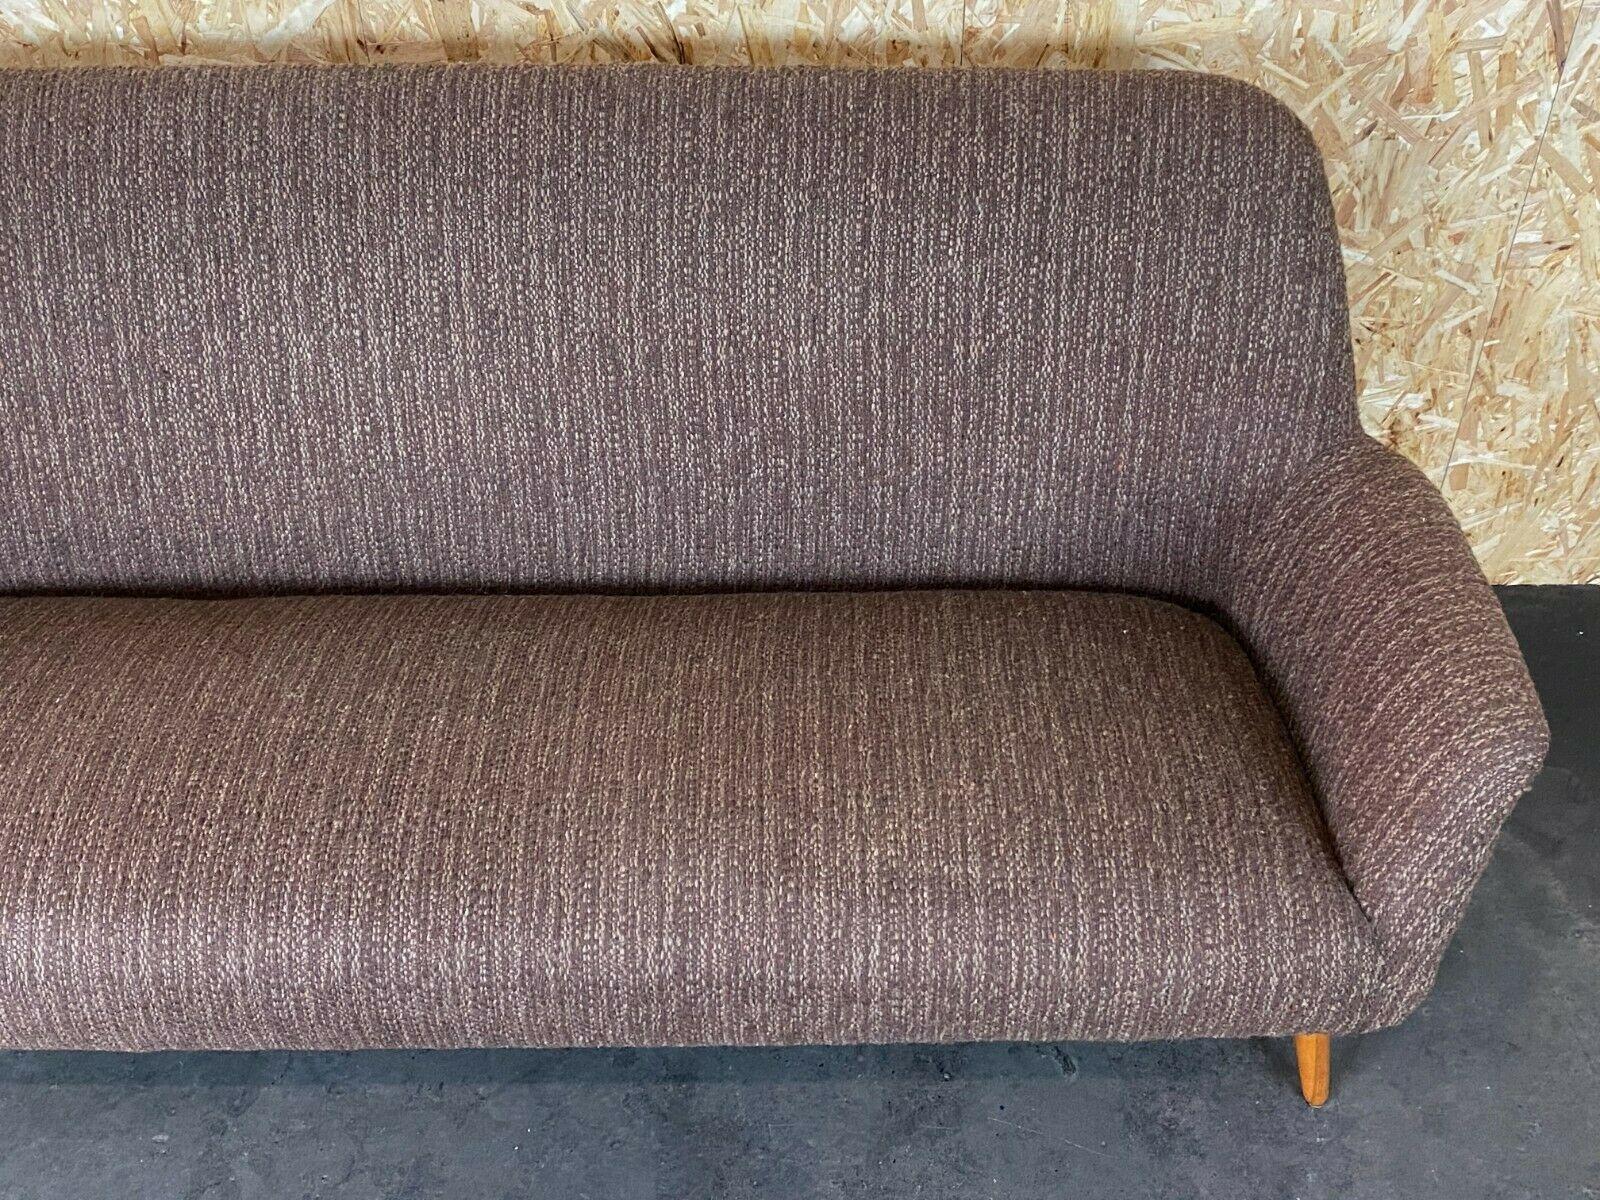 60's couch